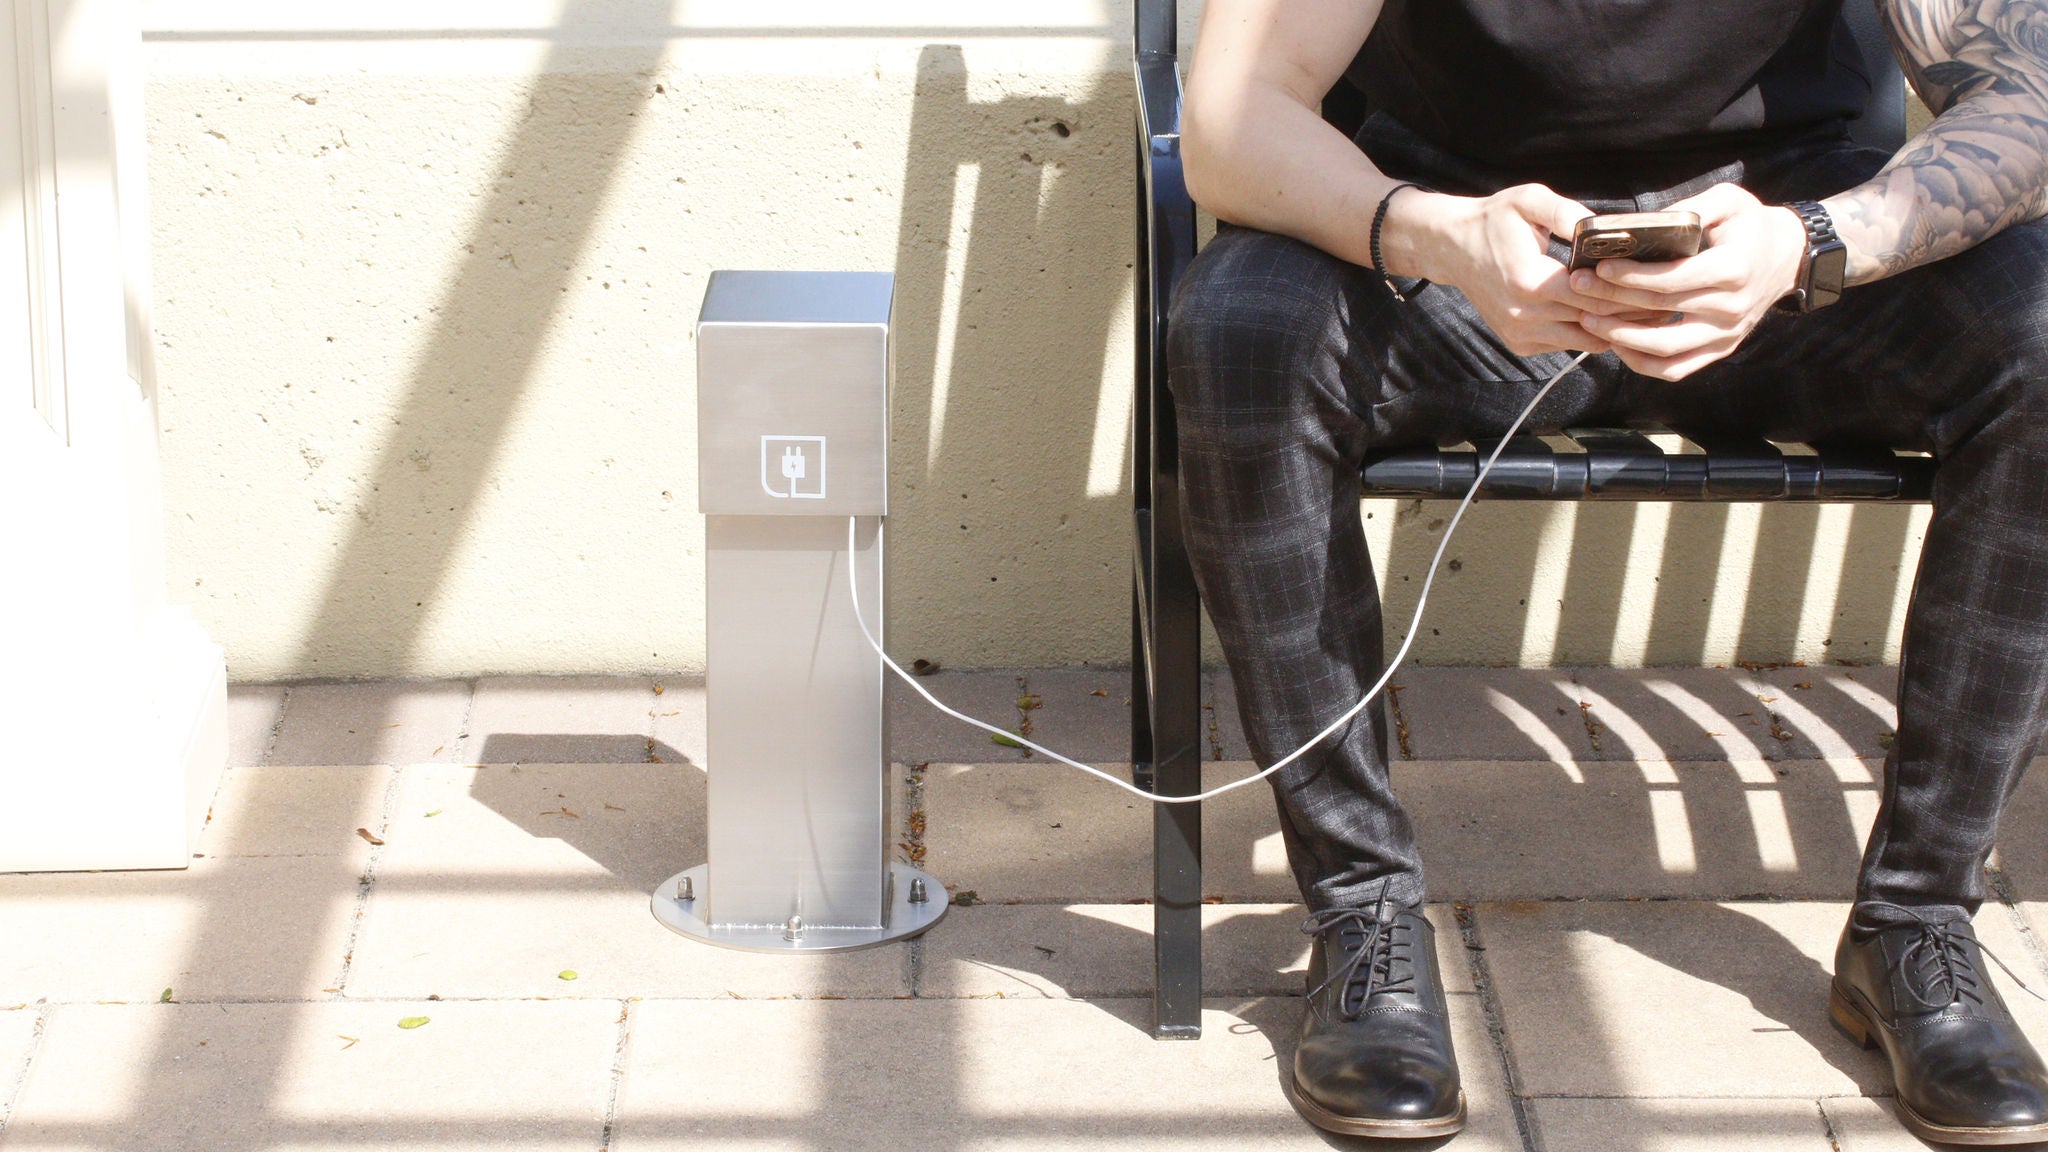 A man sitting on a bench charging his phone with a power pedestal